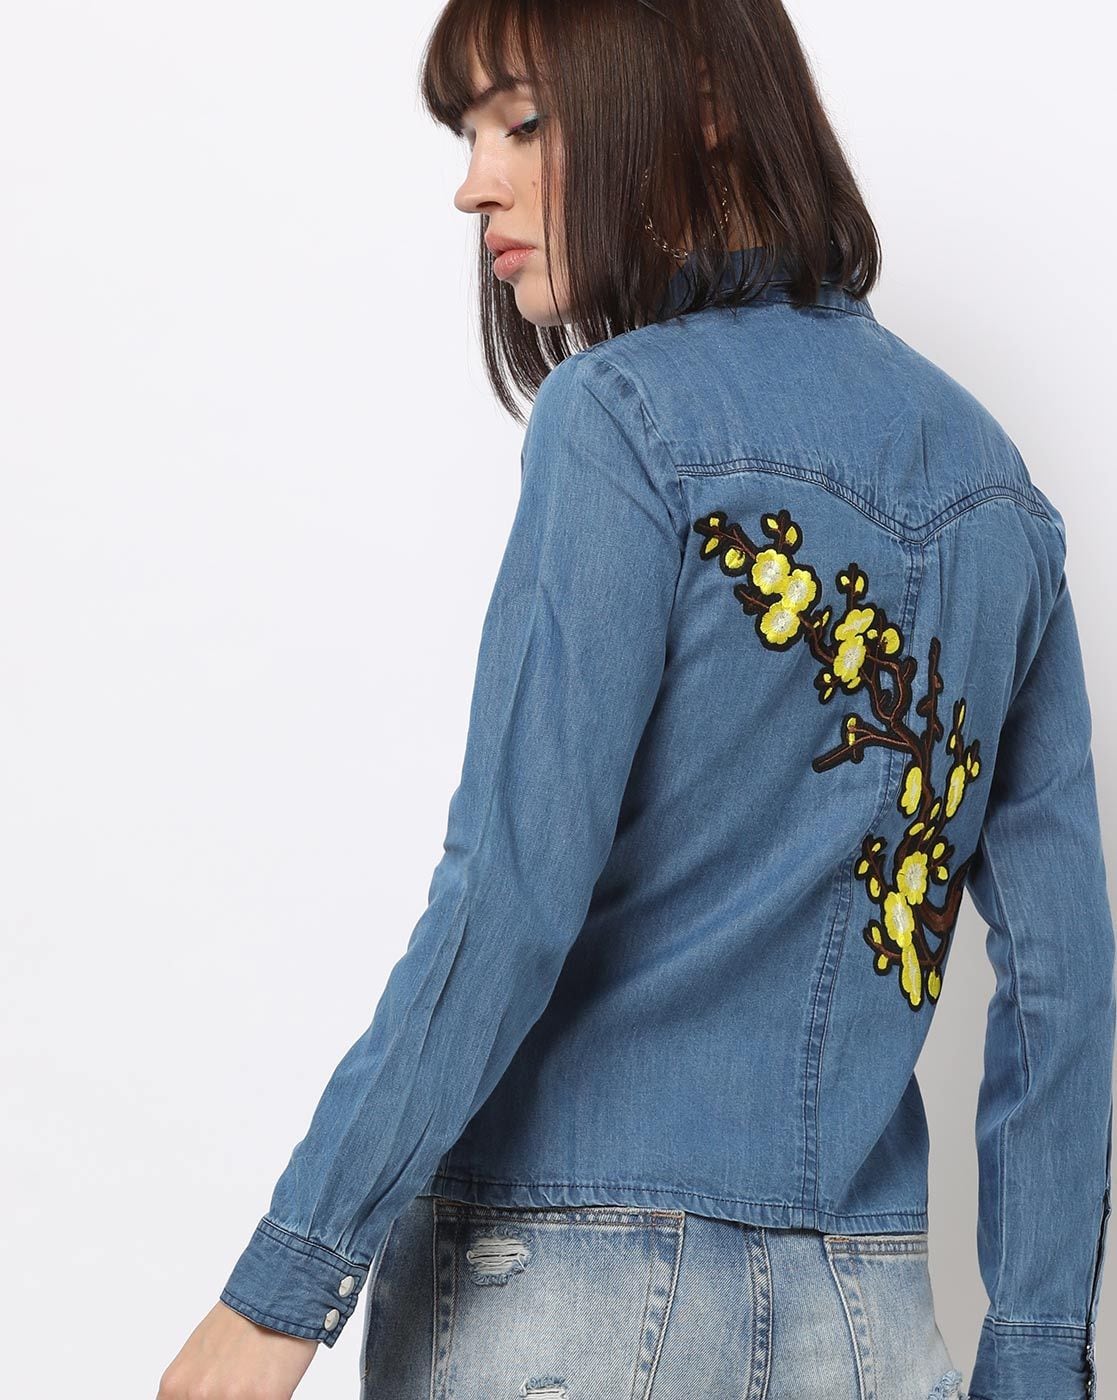 Buy 9 Impression Women Blue Embroidered Denim Collared Shirt Style Top (XS)  at Amazon.in